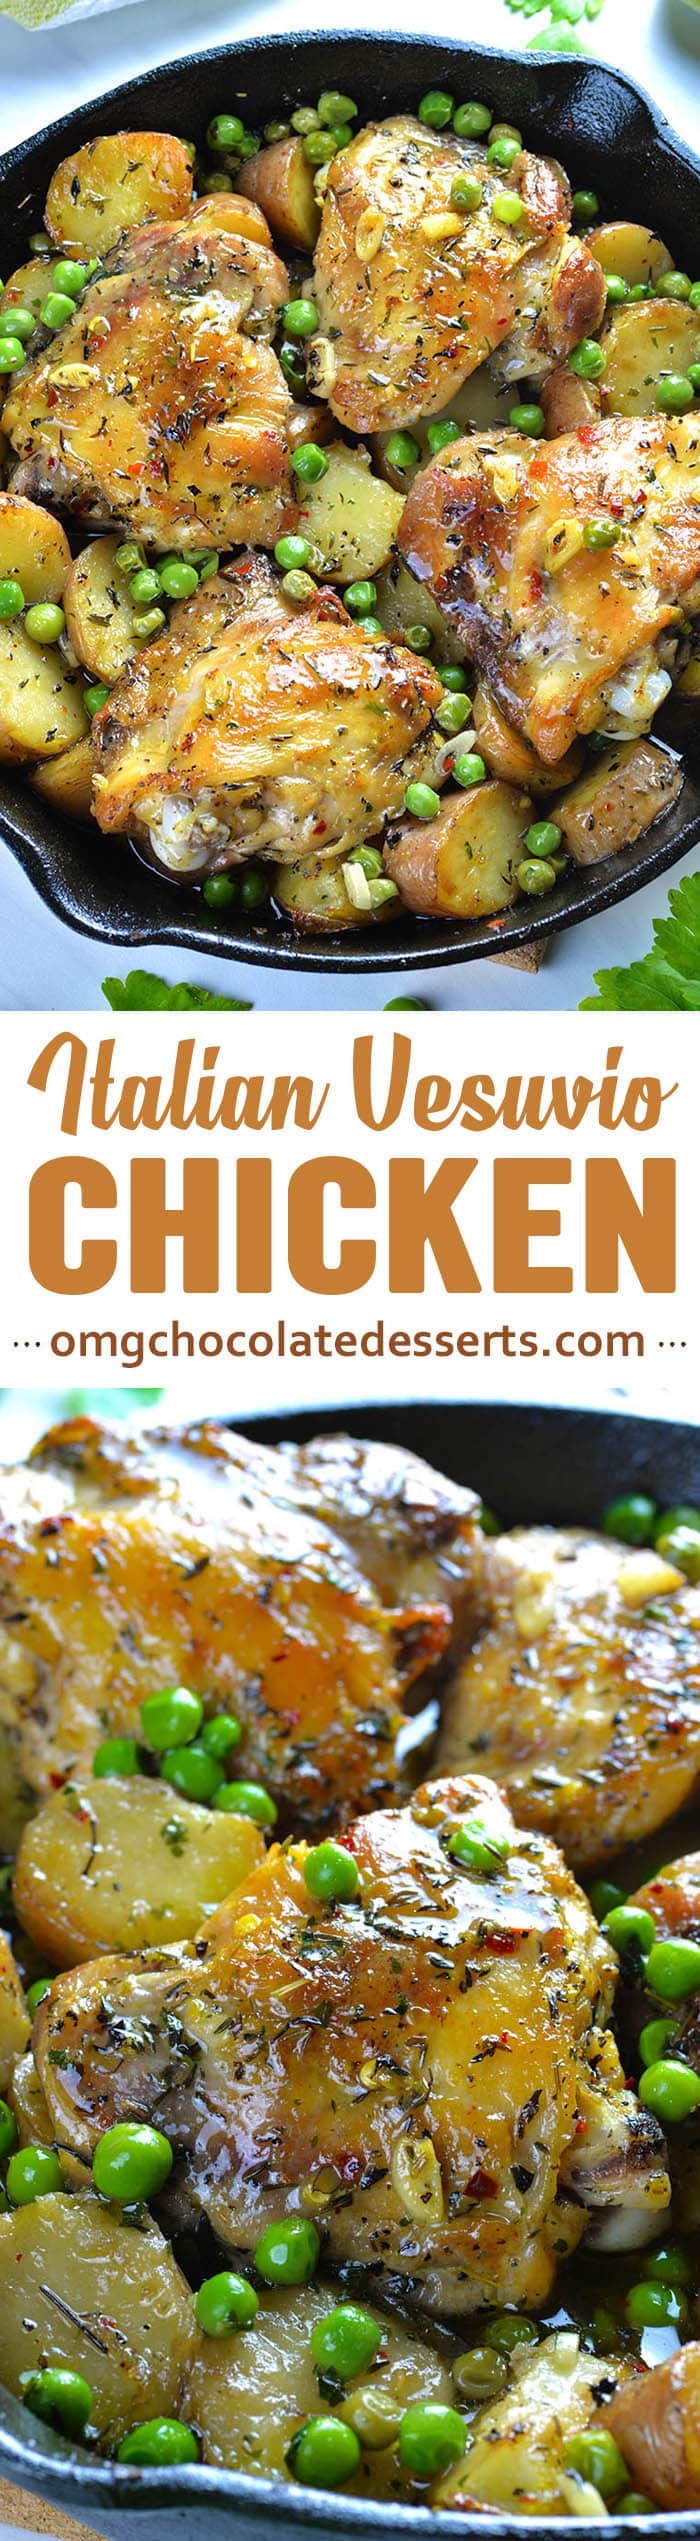 Chicken Vesuvio Recipe is delicious, restaurant styled, one skillet dinner for whole family! Roasted skillet chicken on the bone, potato chunks and peas in garlicky white whine sauce is family favorite!